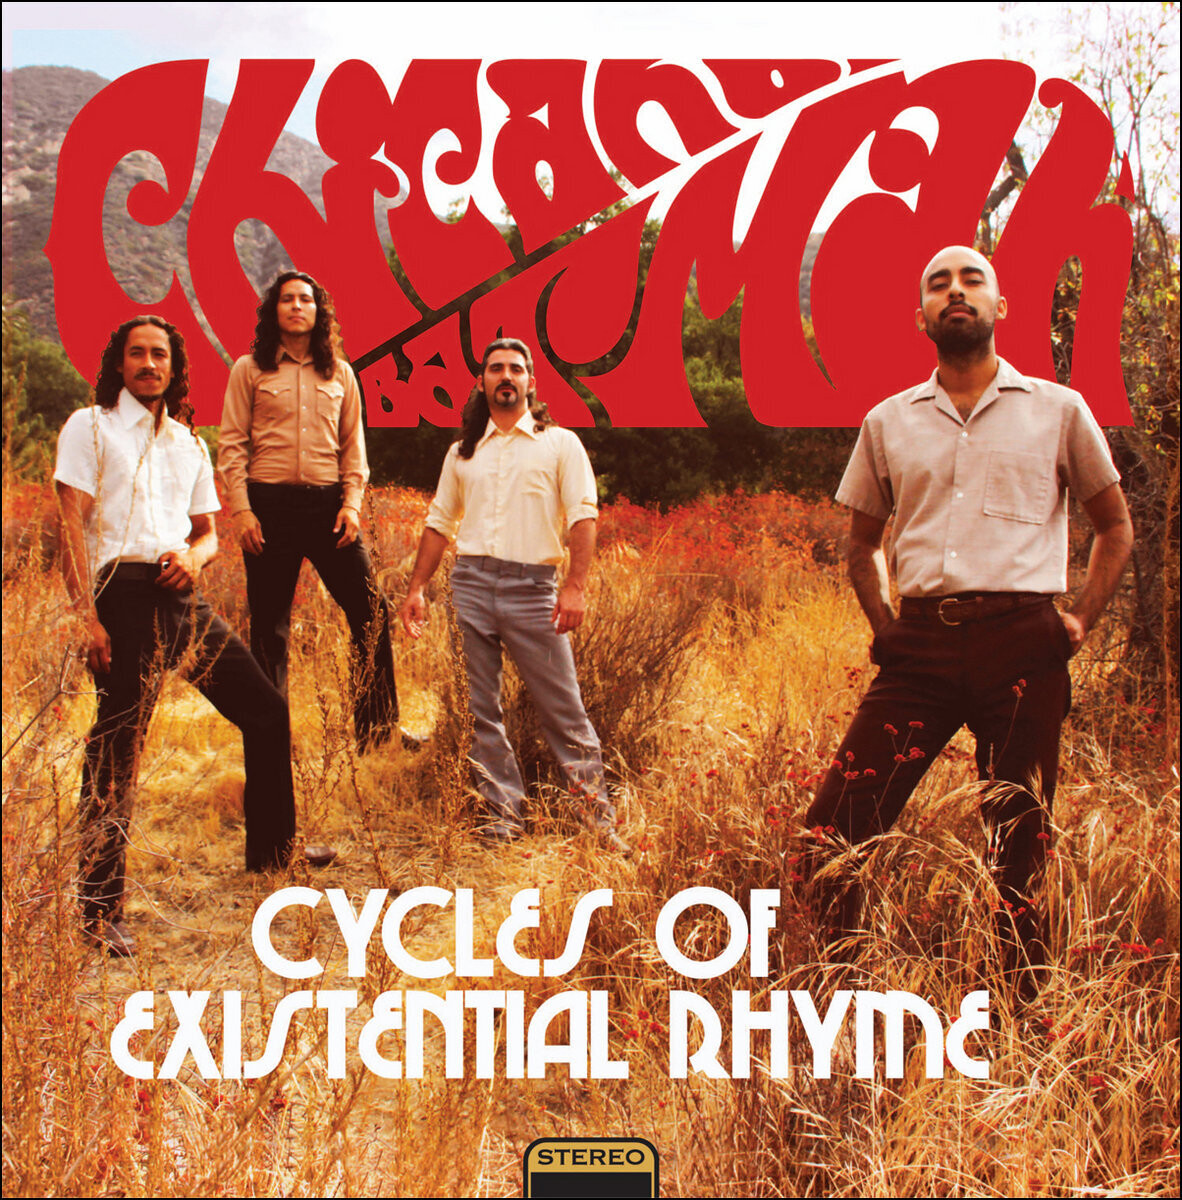 Chicano Batman "Cycles Of Existential Rhyme" *MaRbLeD MaGmA ViNyL!*